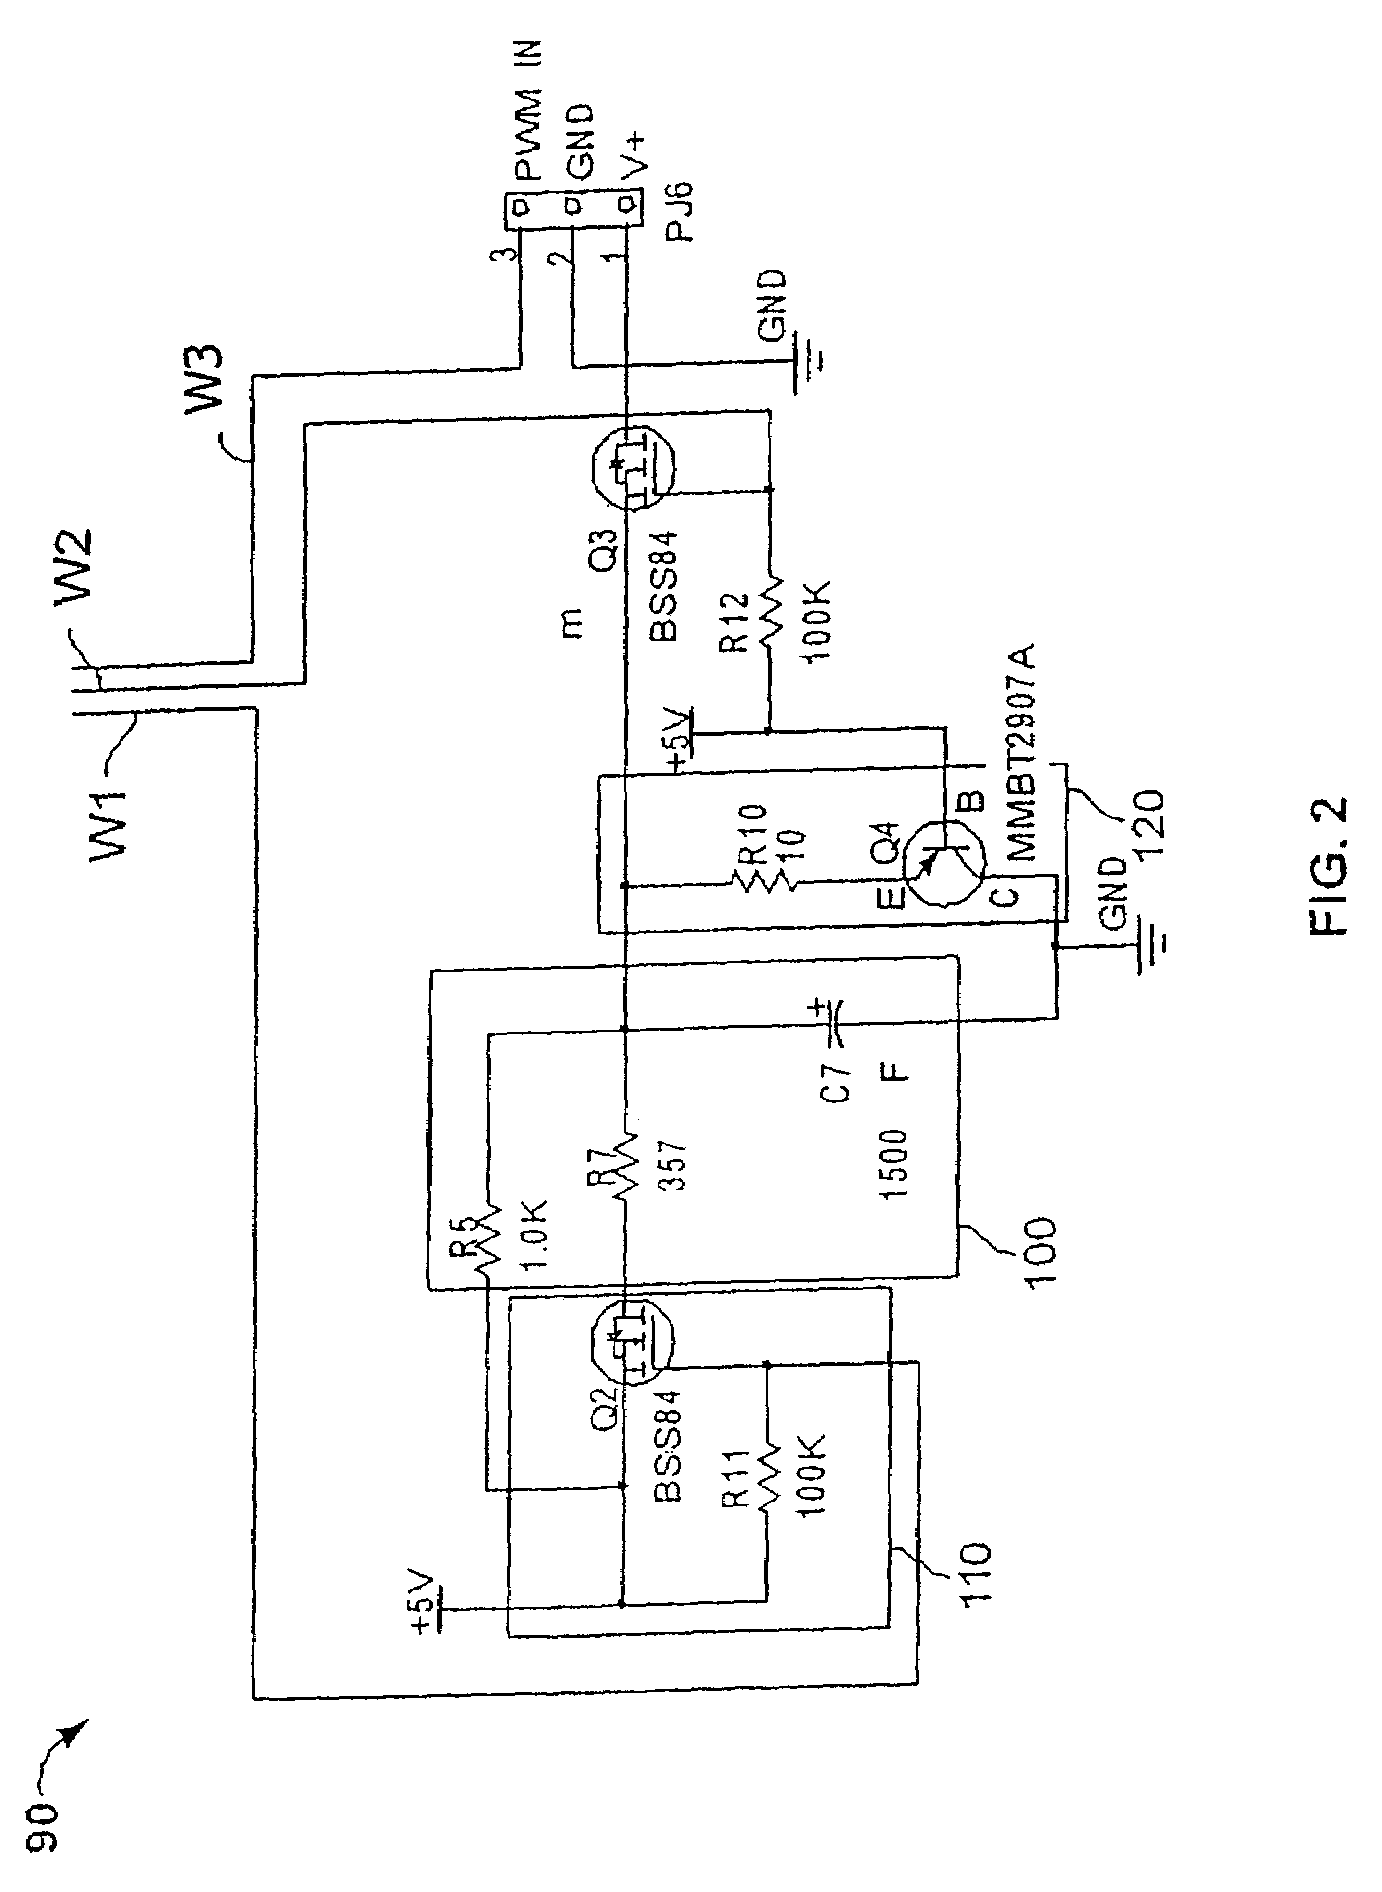 Pressure transmitter with power cycled hall effect sensor